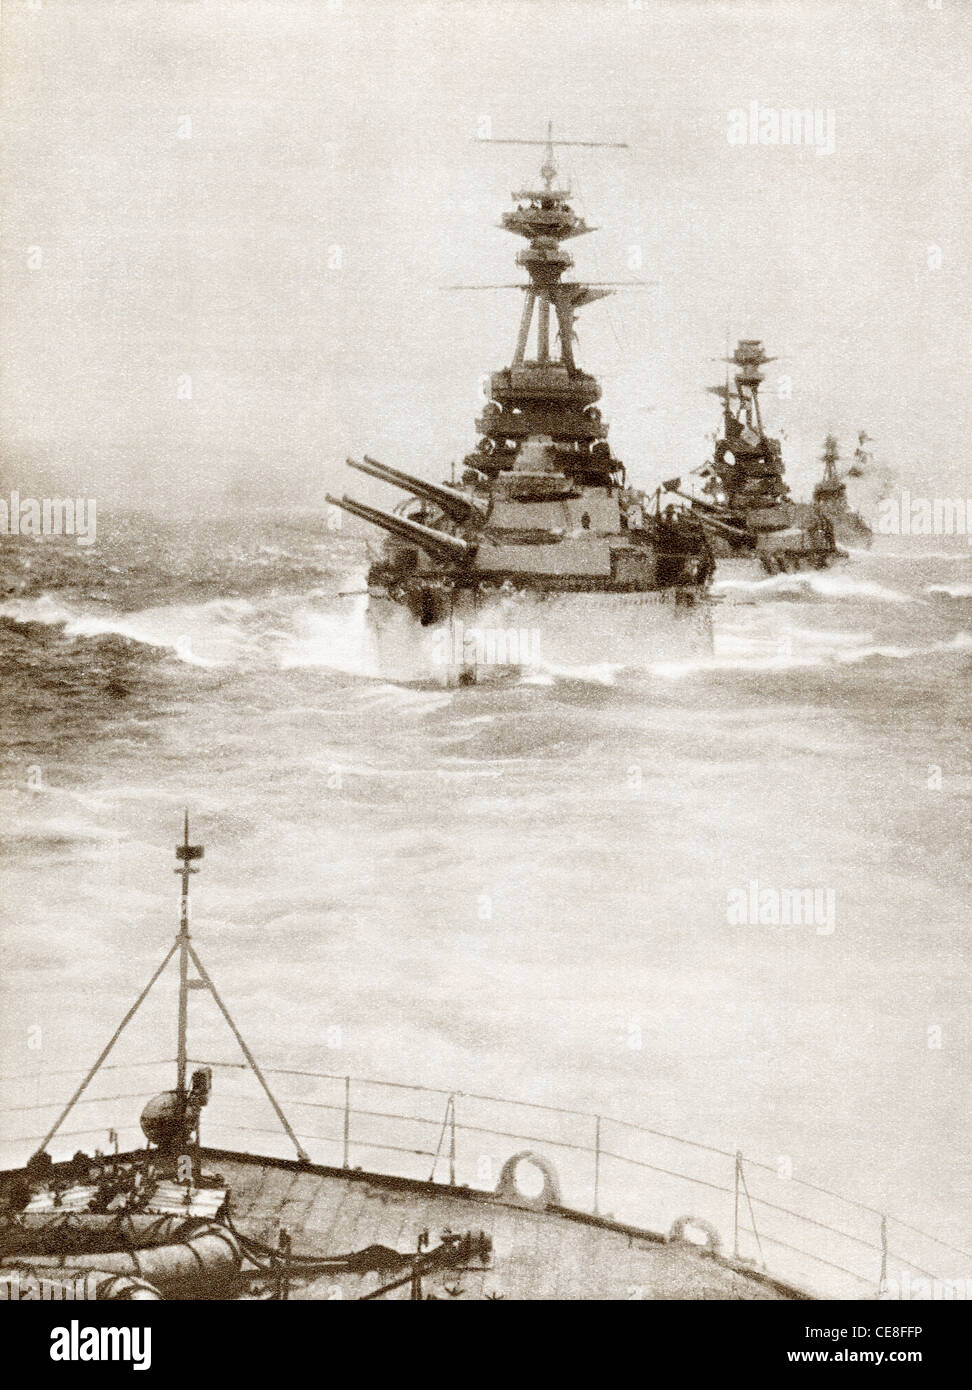 Battleships from a Battle Squadron of the Grand Fleet patrolling the North Sea in 1916 during World War I. Stock Photo